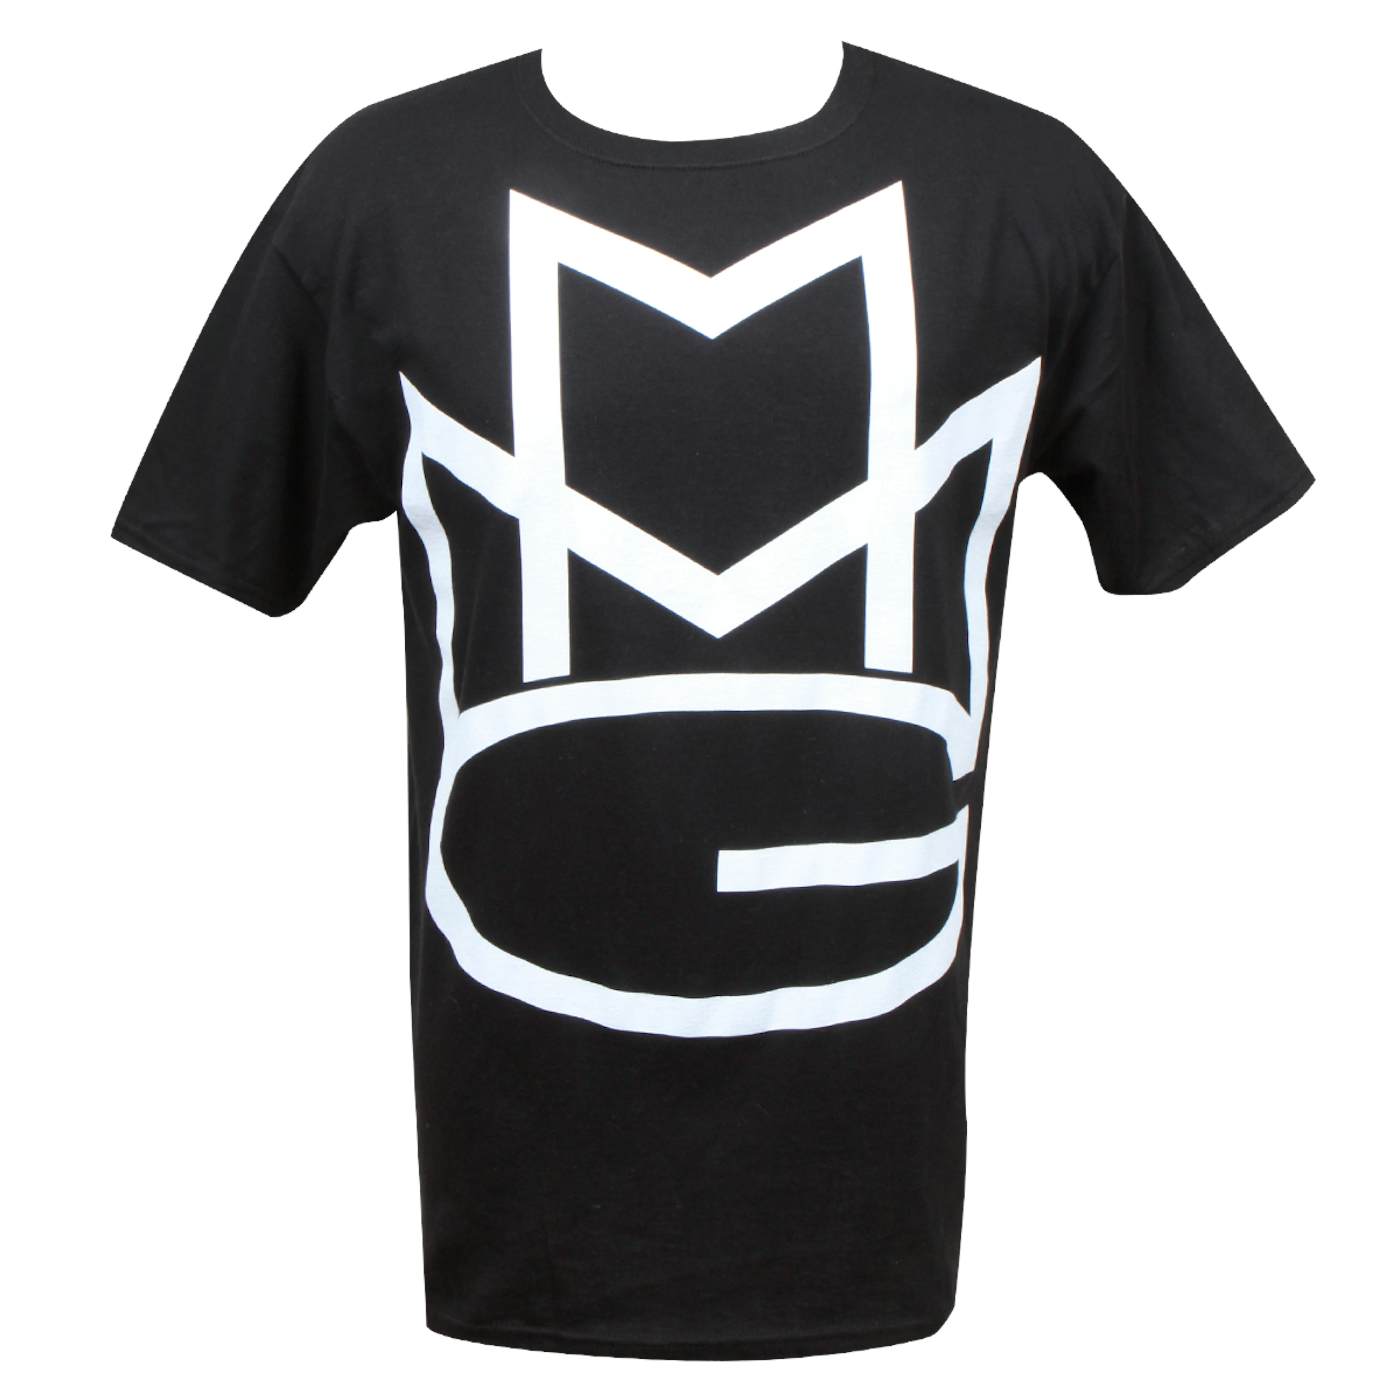 Stalley Big MMG Logo T-Shirt - DO NOT ENABLE